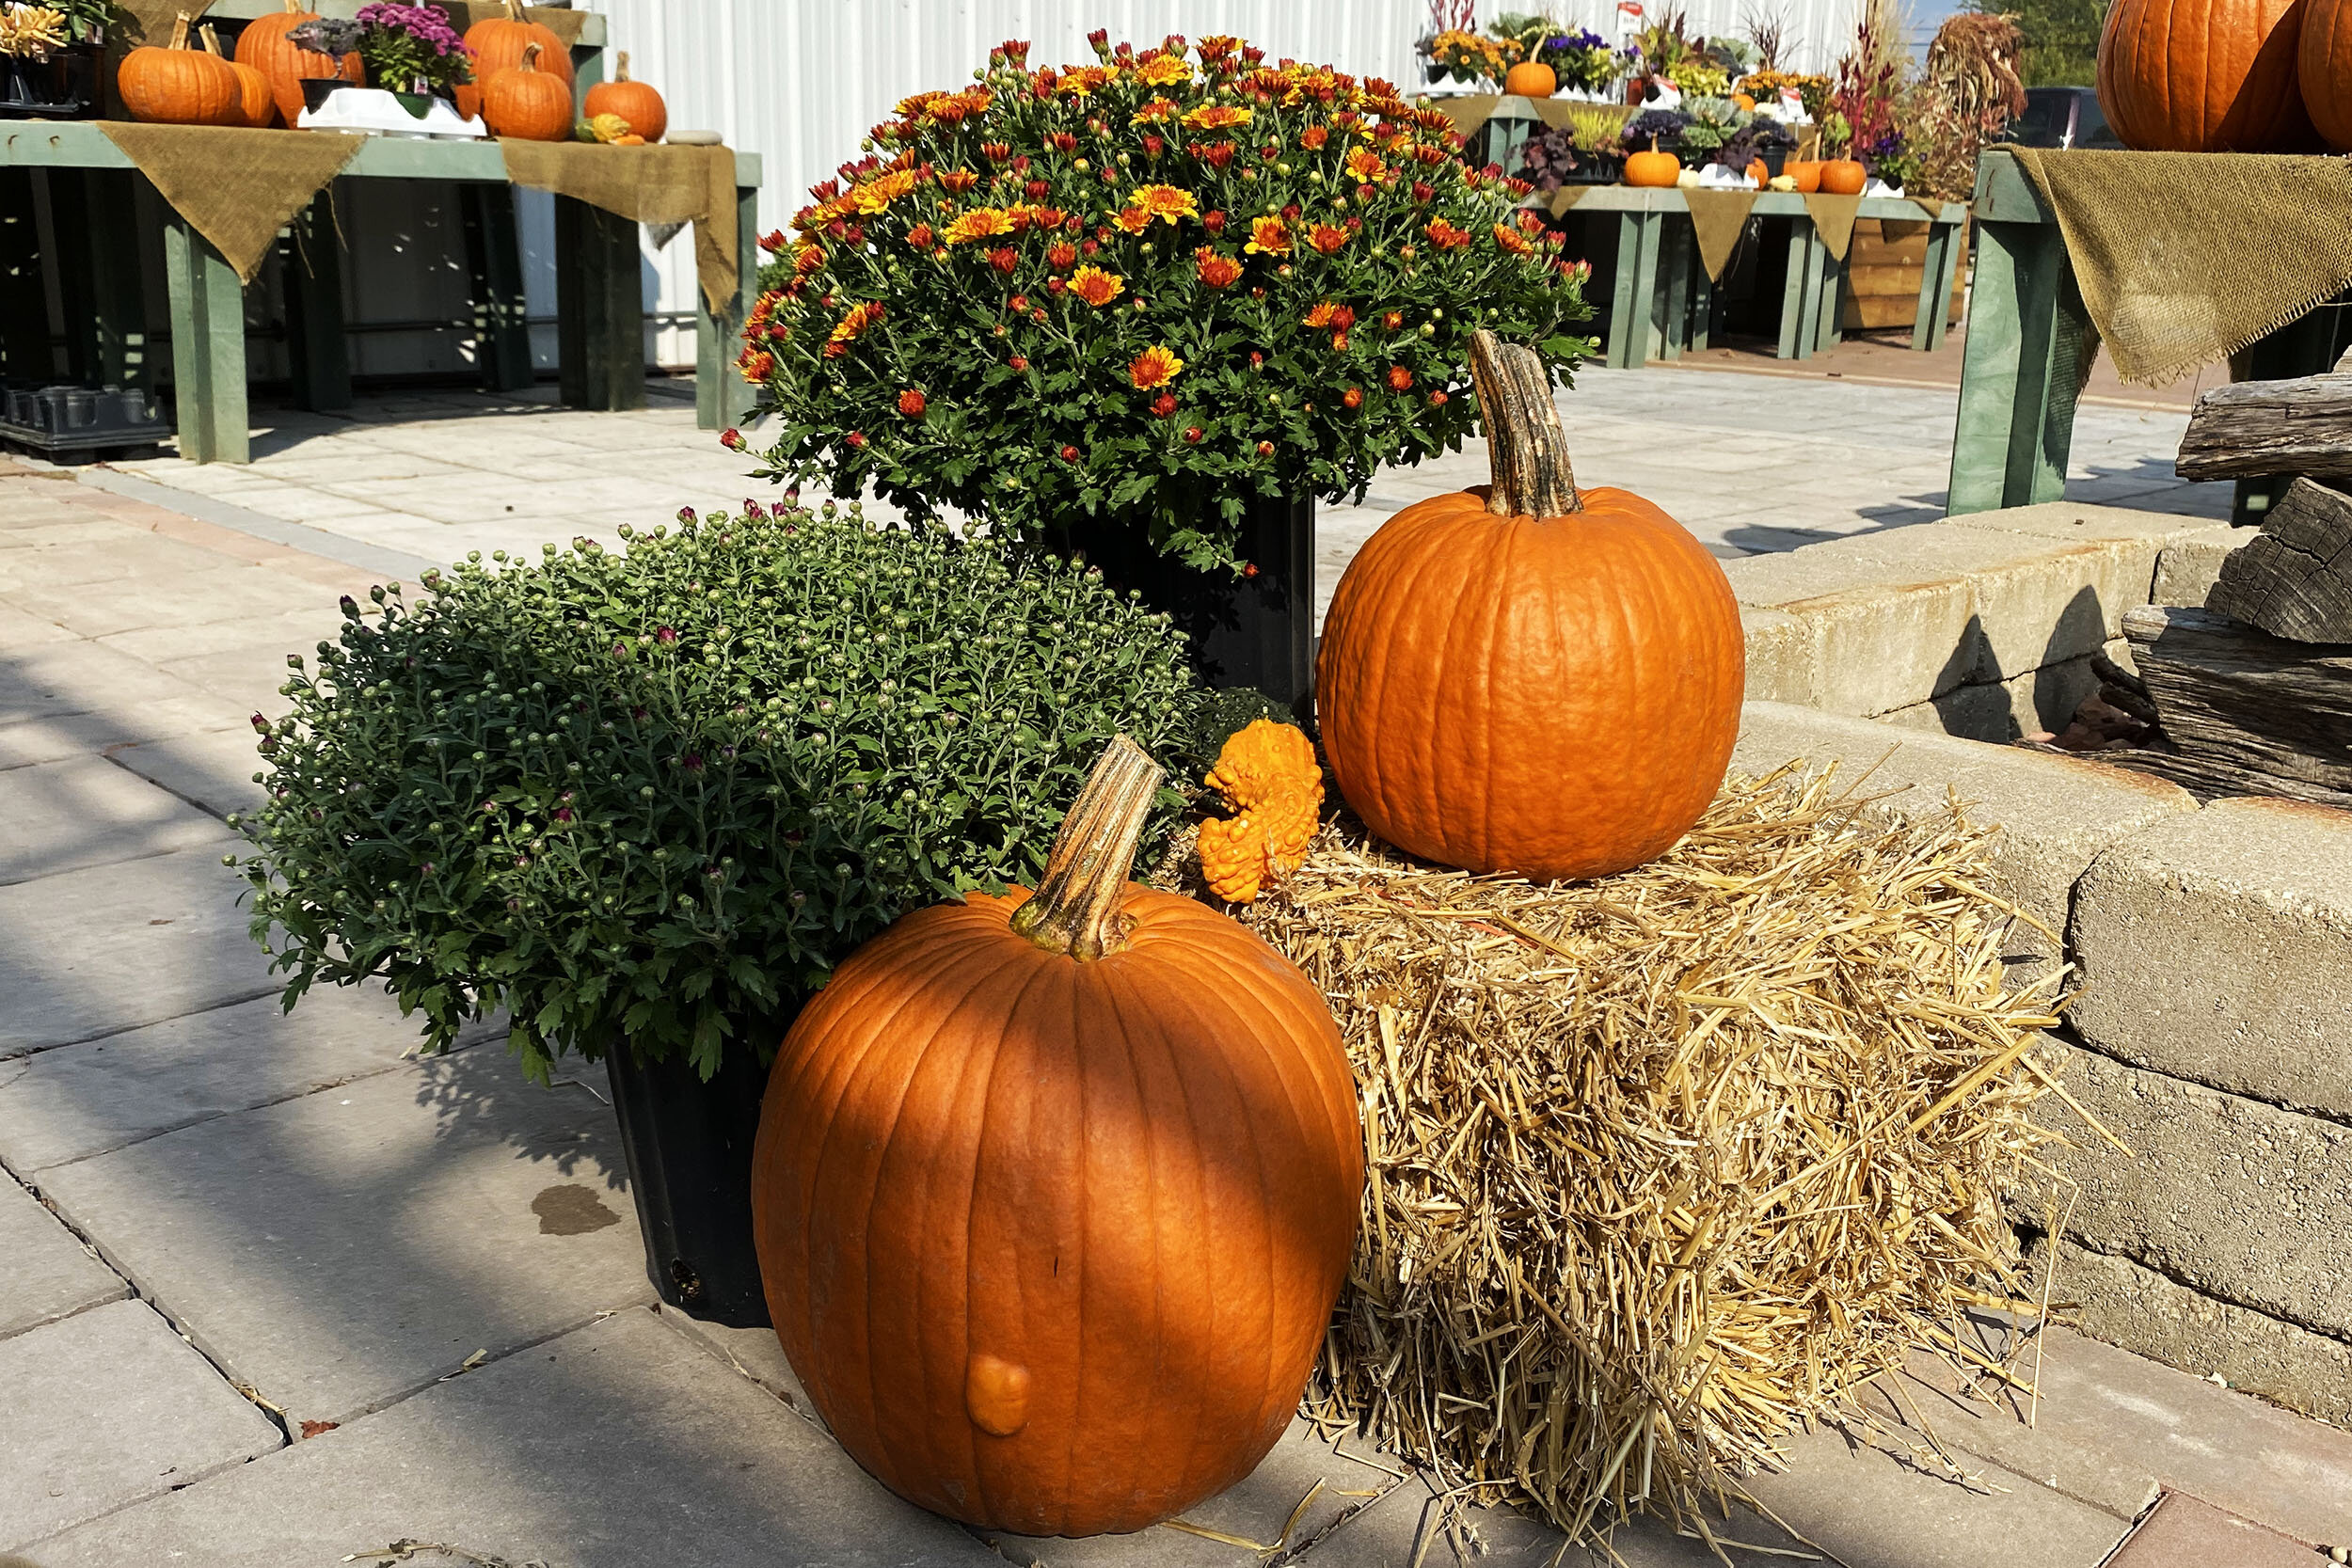 Stop in today for our full selection of fall decor